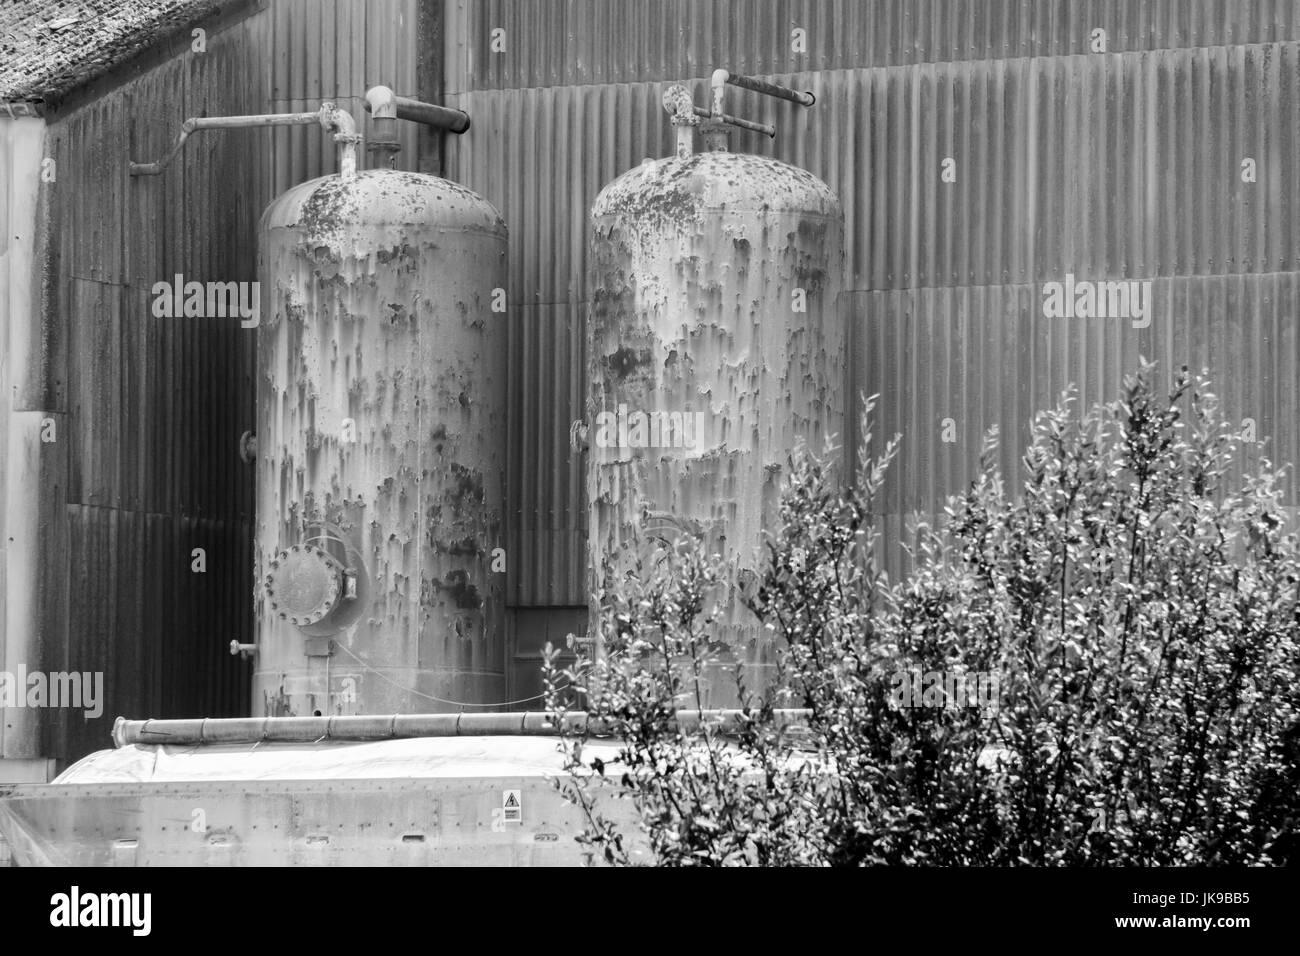 Black and white image of two external high pressure cylinders involved in a manufacturing process. Stock Photo